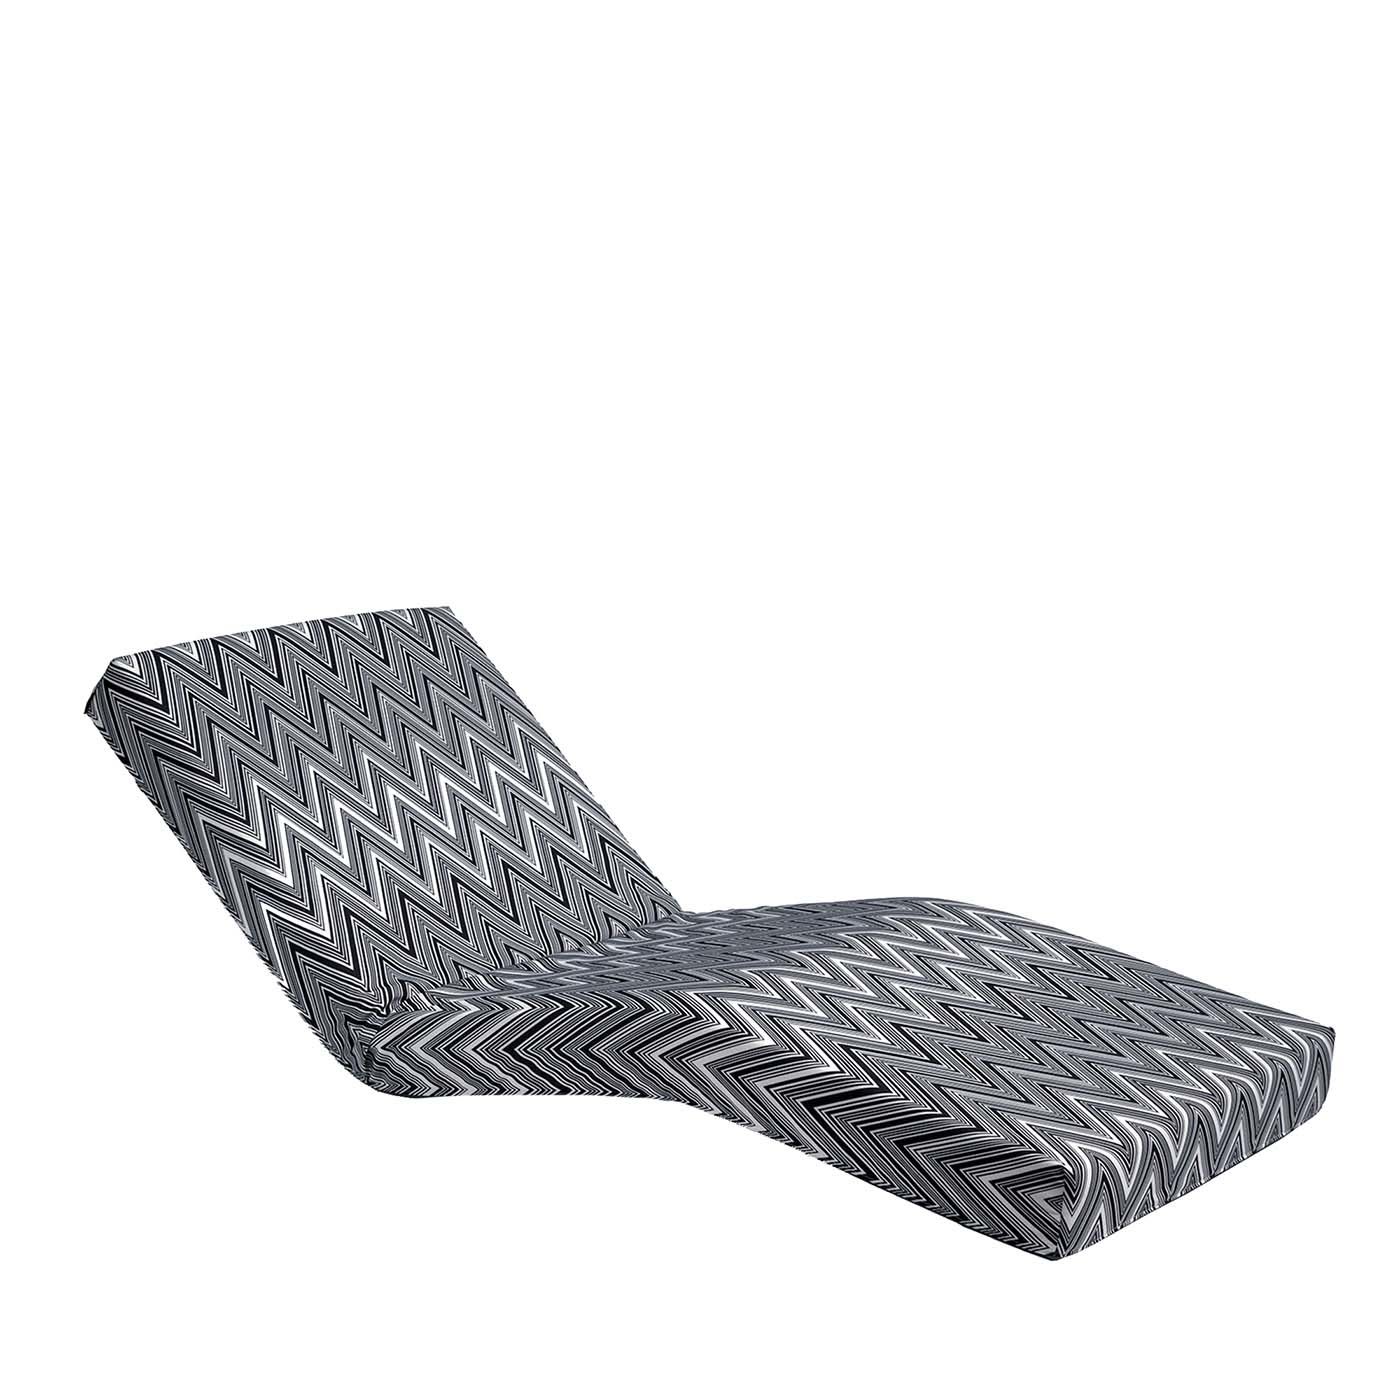 KEW BLACK&WHITE JALAMAR OUTDOOR CHAISE LONGUE - Missoni Home Collection